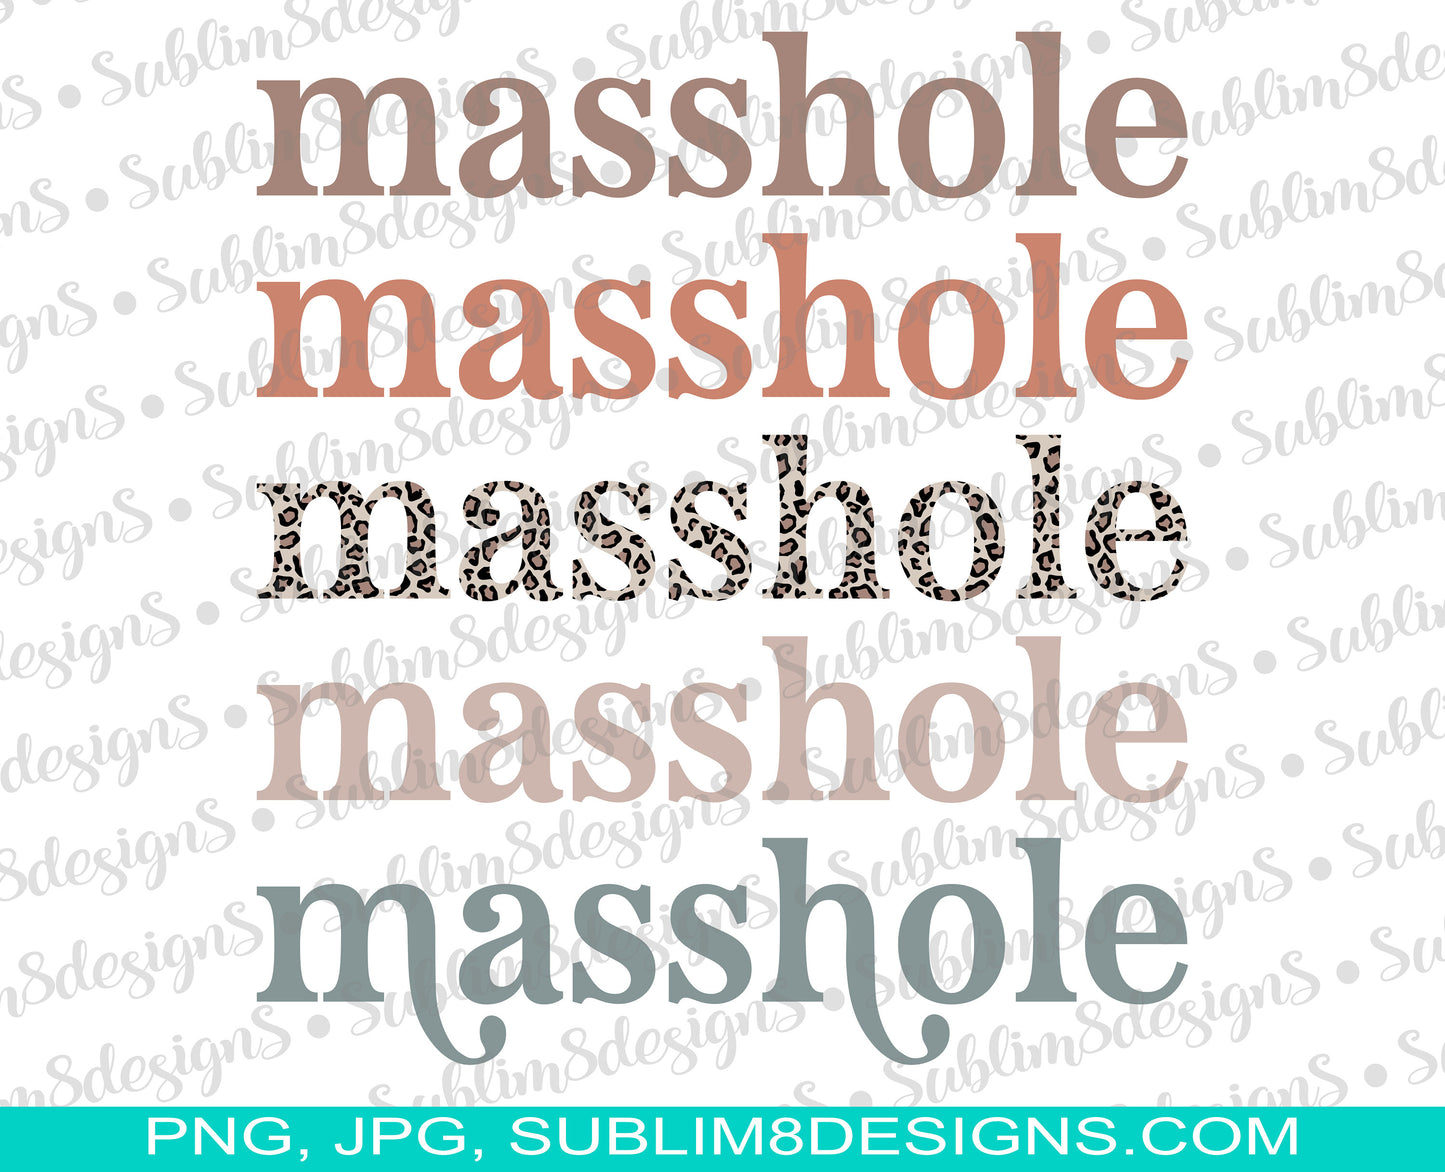 Masshole SVG, PNG and JPG